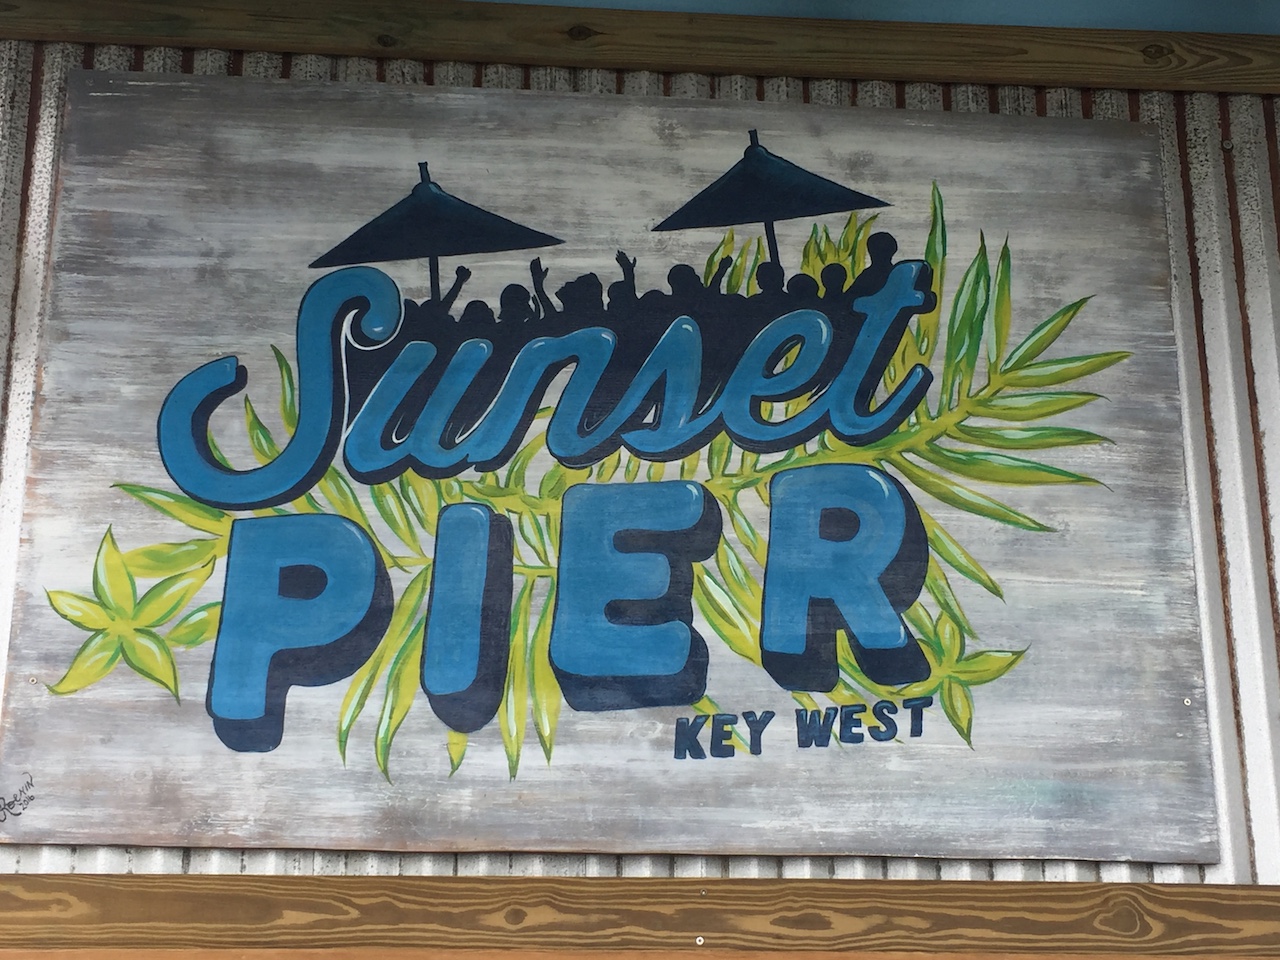 Sunset Pier located at 0 Duval St.